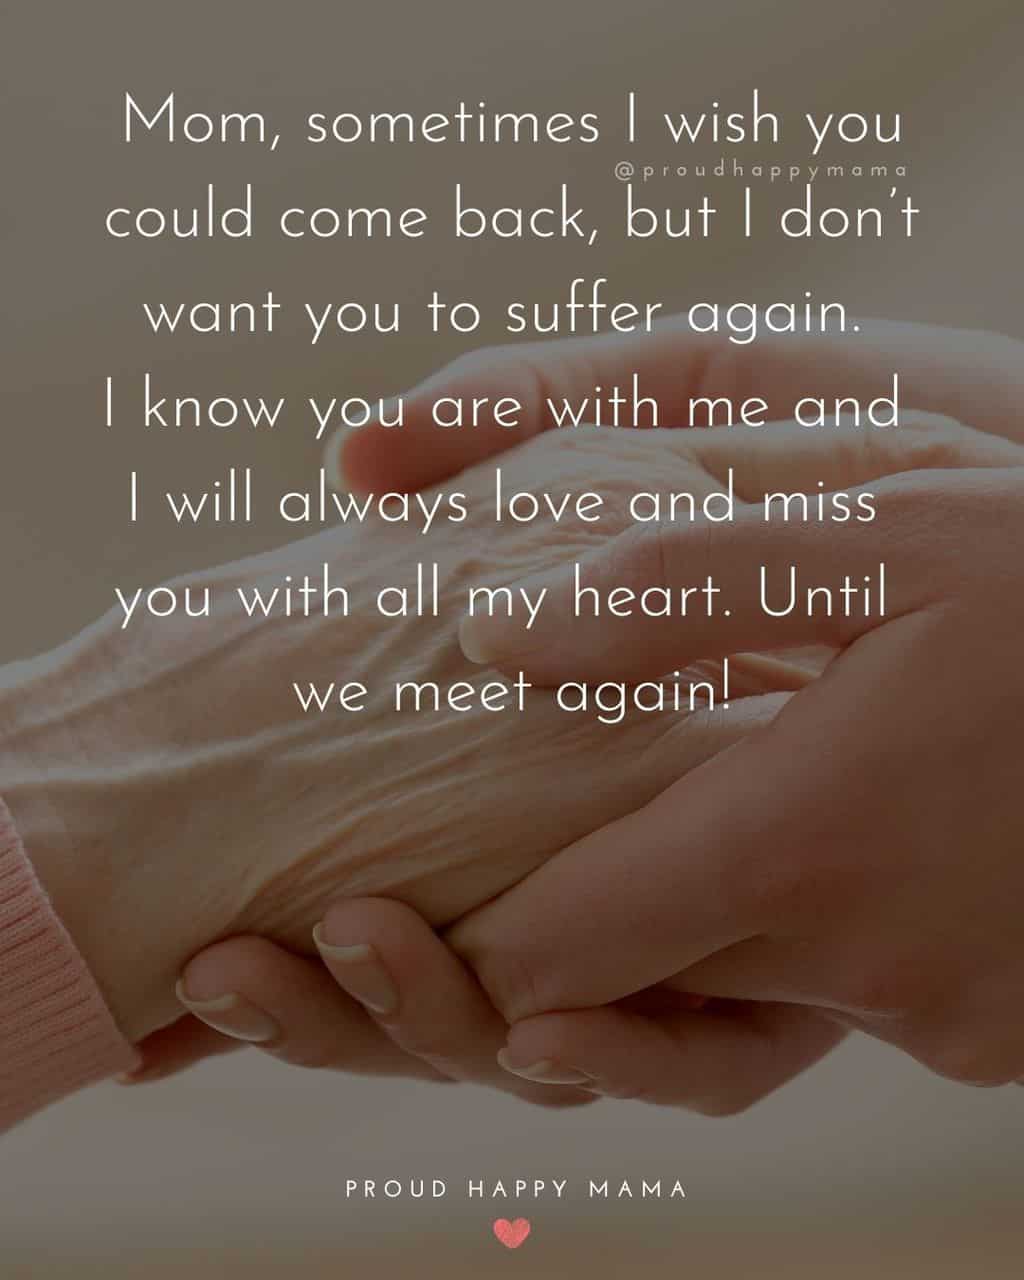 Close up of daughter holding elderly mother's hand with text overlay. 'Mom sometimes I wish you could come back, but I don’t want you to suffer again. I know you are with me and I will always love and miss you with all my heart. Until we meet again.'